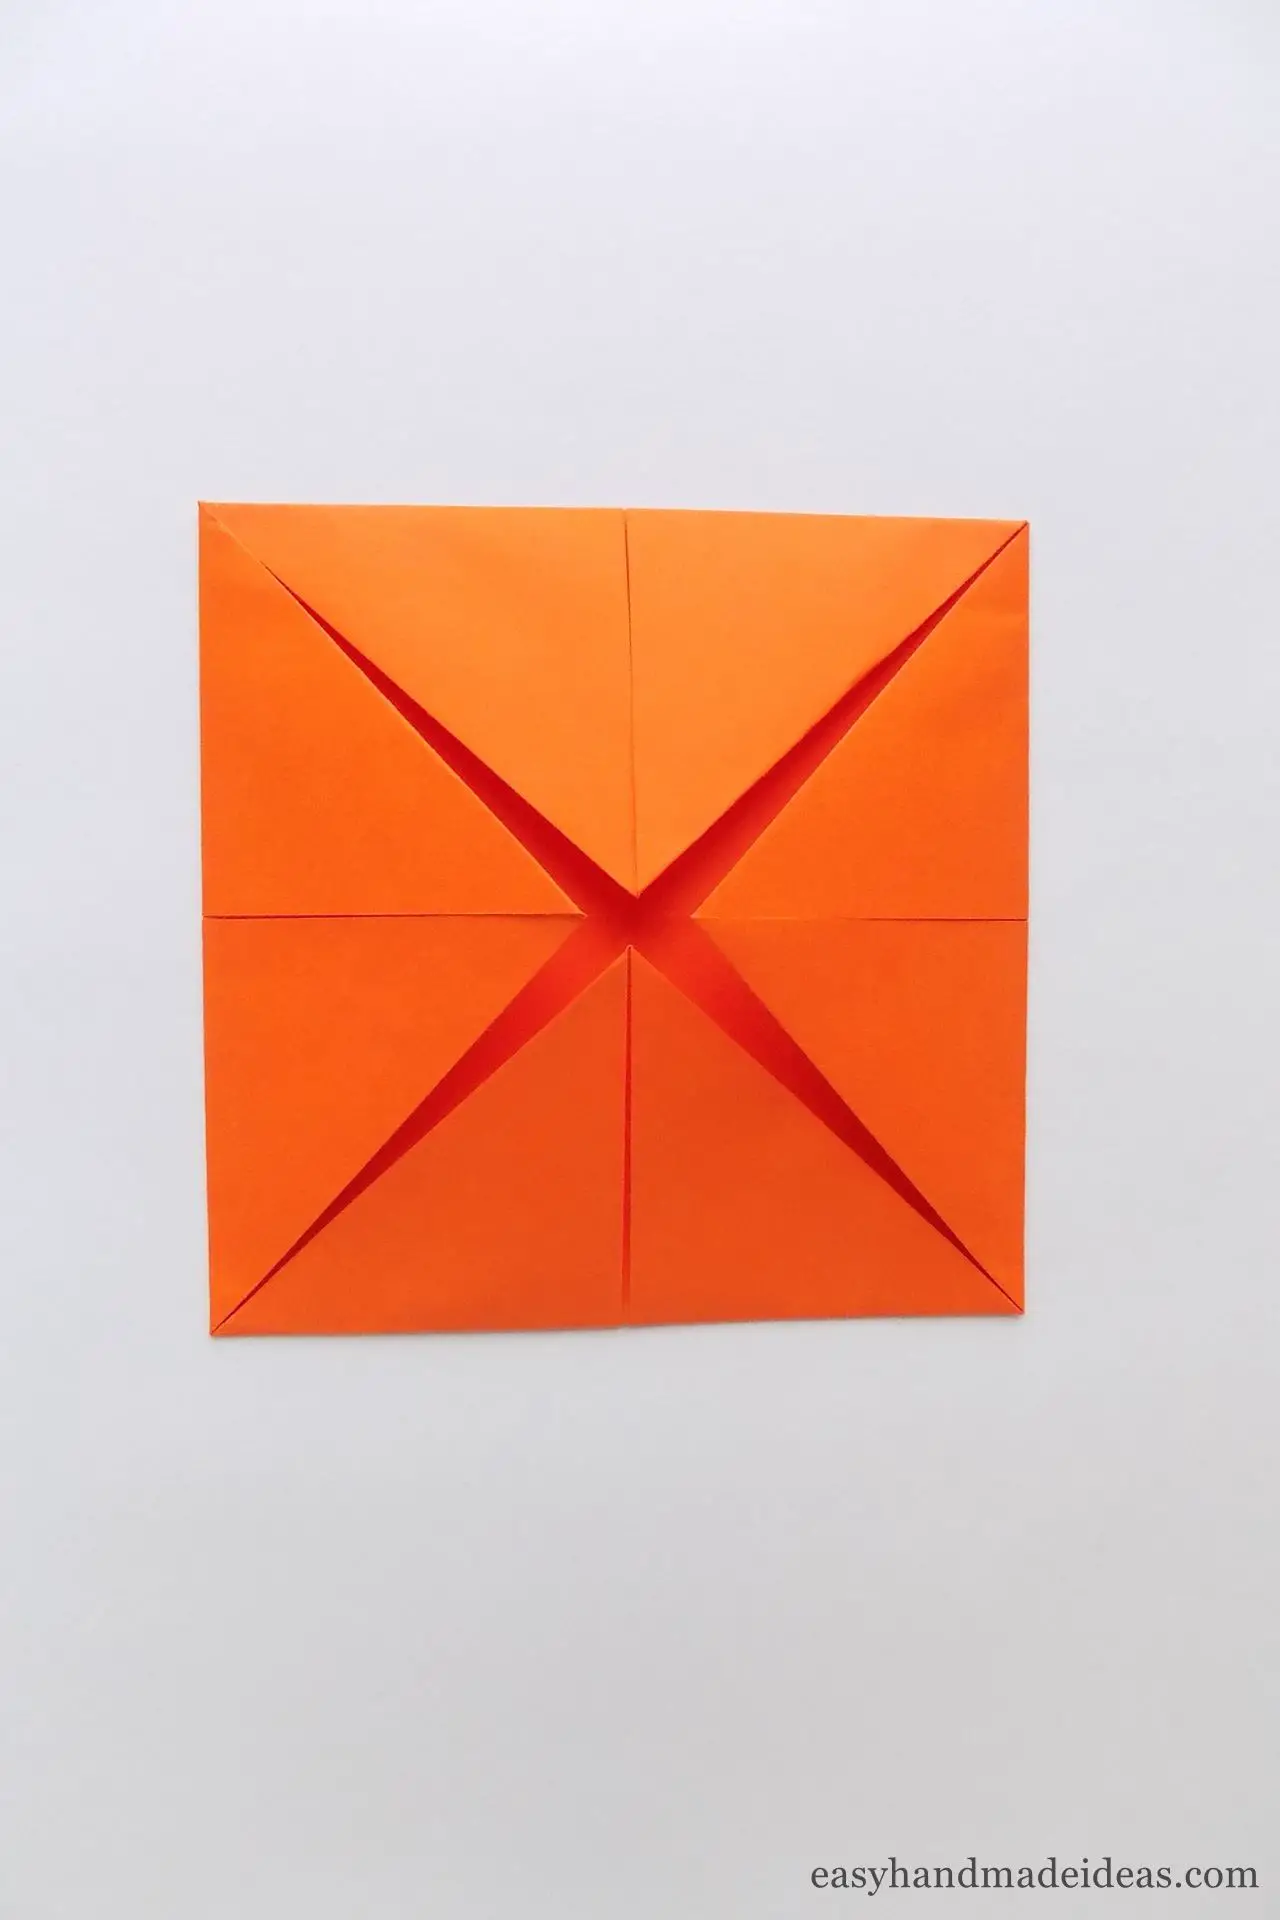 Fold the corners toward the center of the square